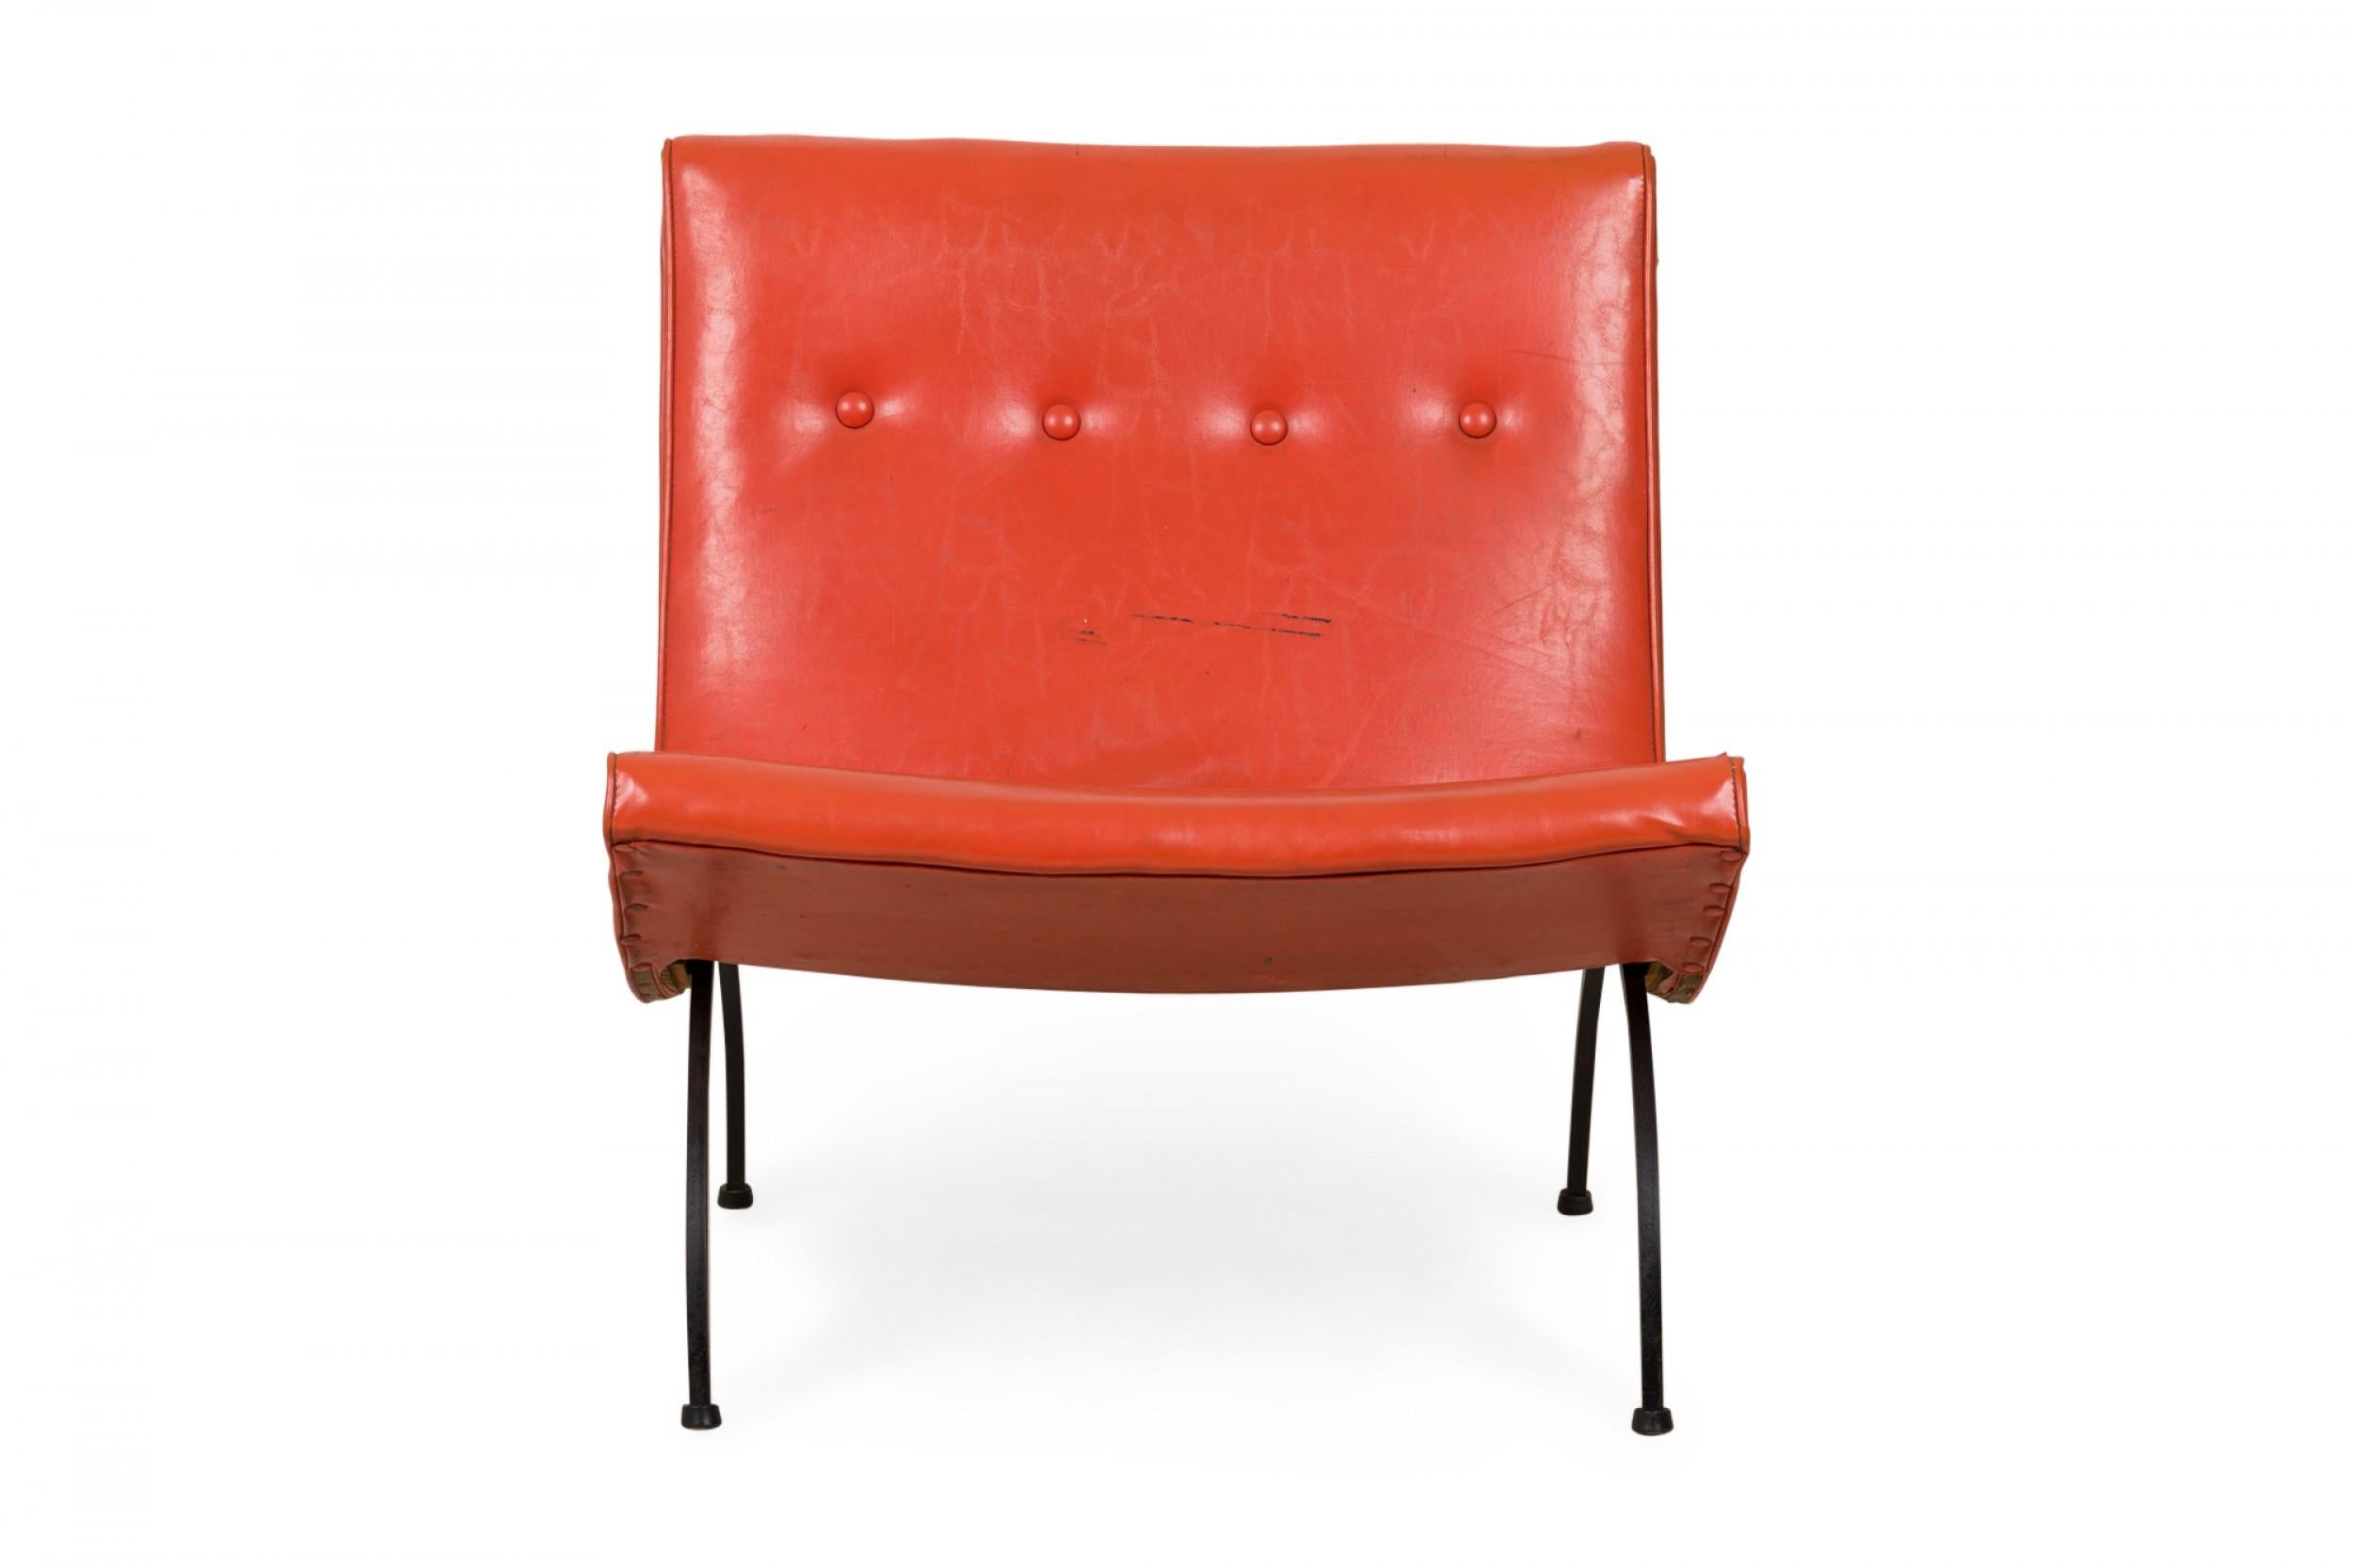 American mid-century slipper / side chair with orange vinyl button tufted upholstery, resting on four curved wrought iron legs ending in small circular feet. (Milo Baughman).
     